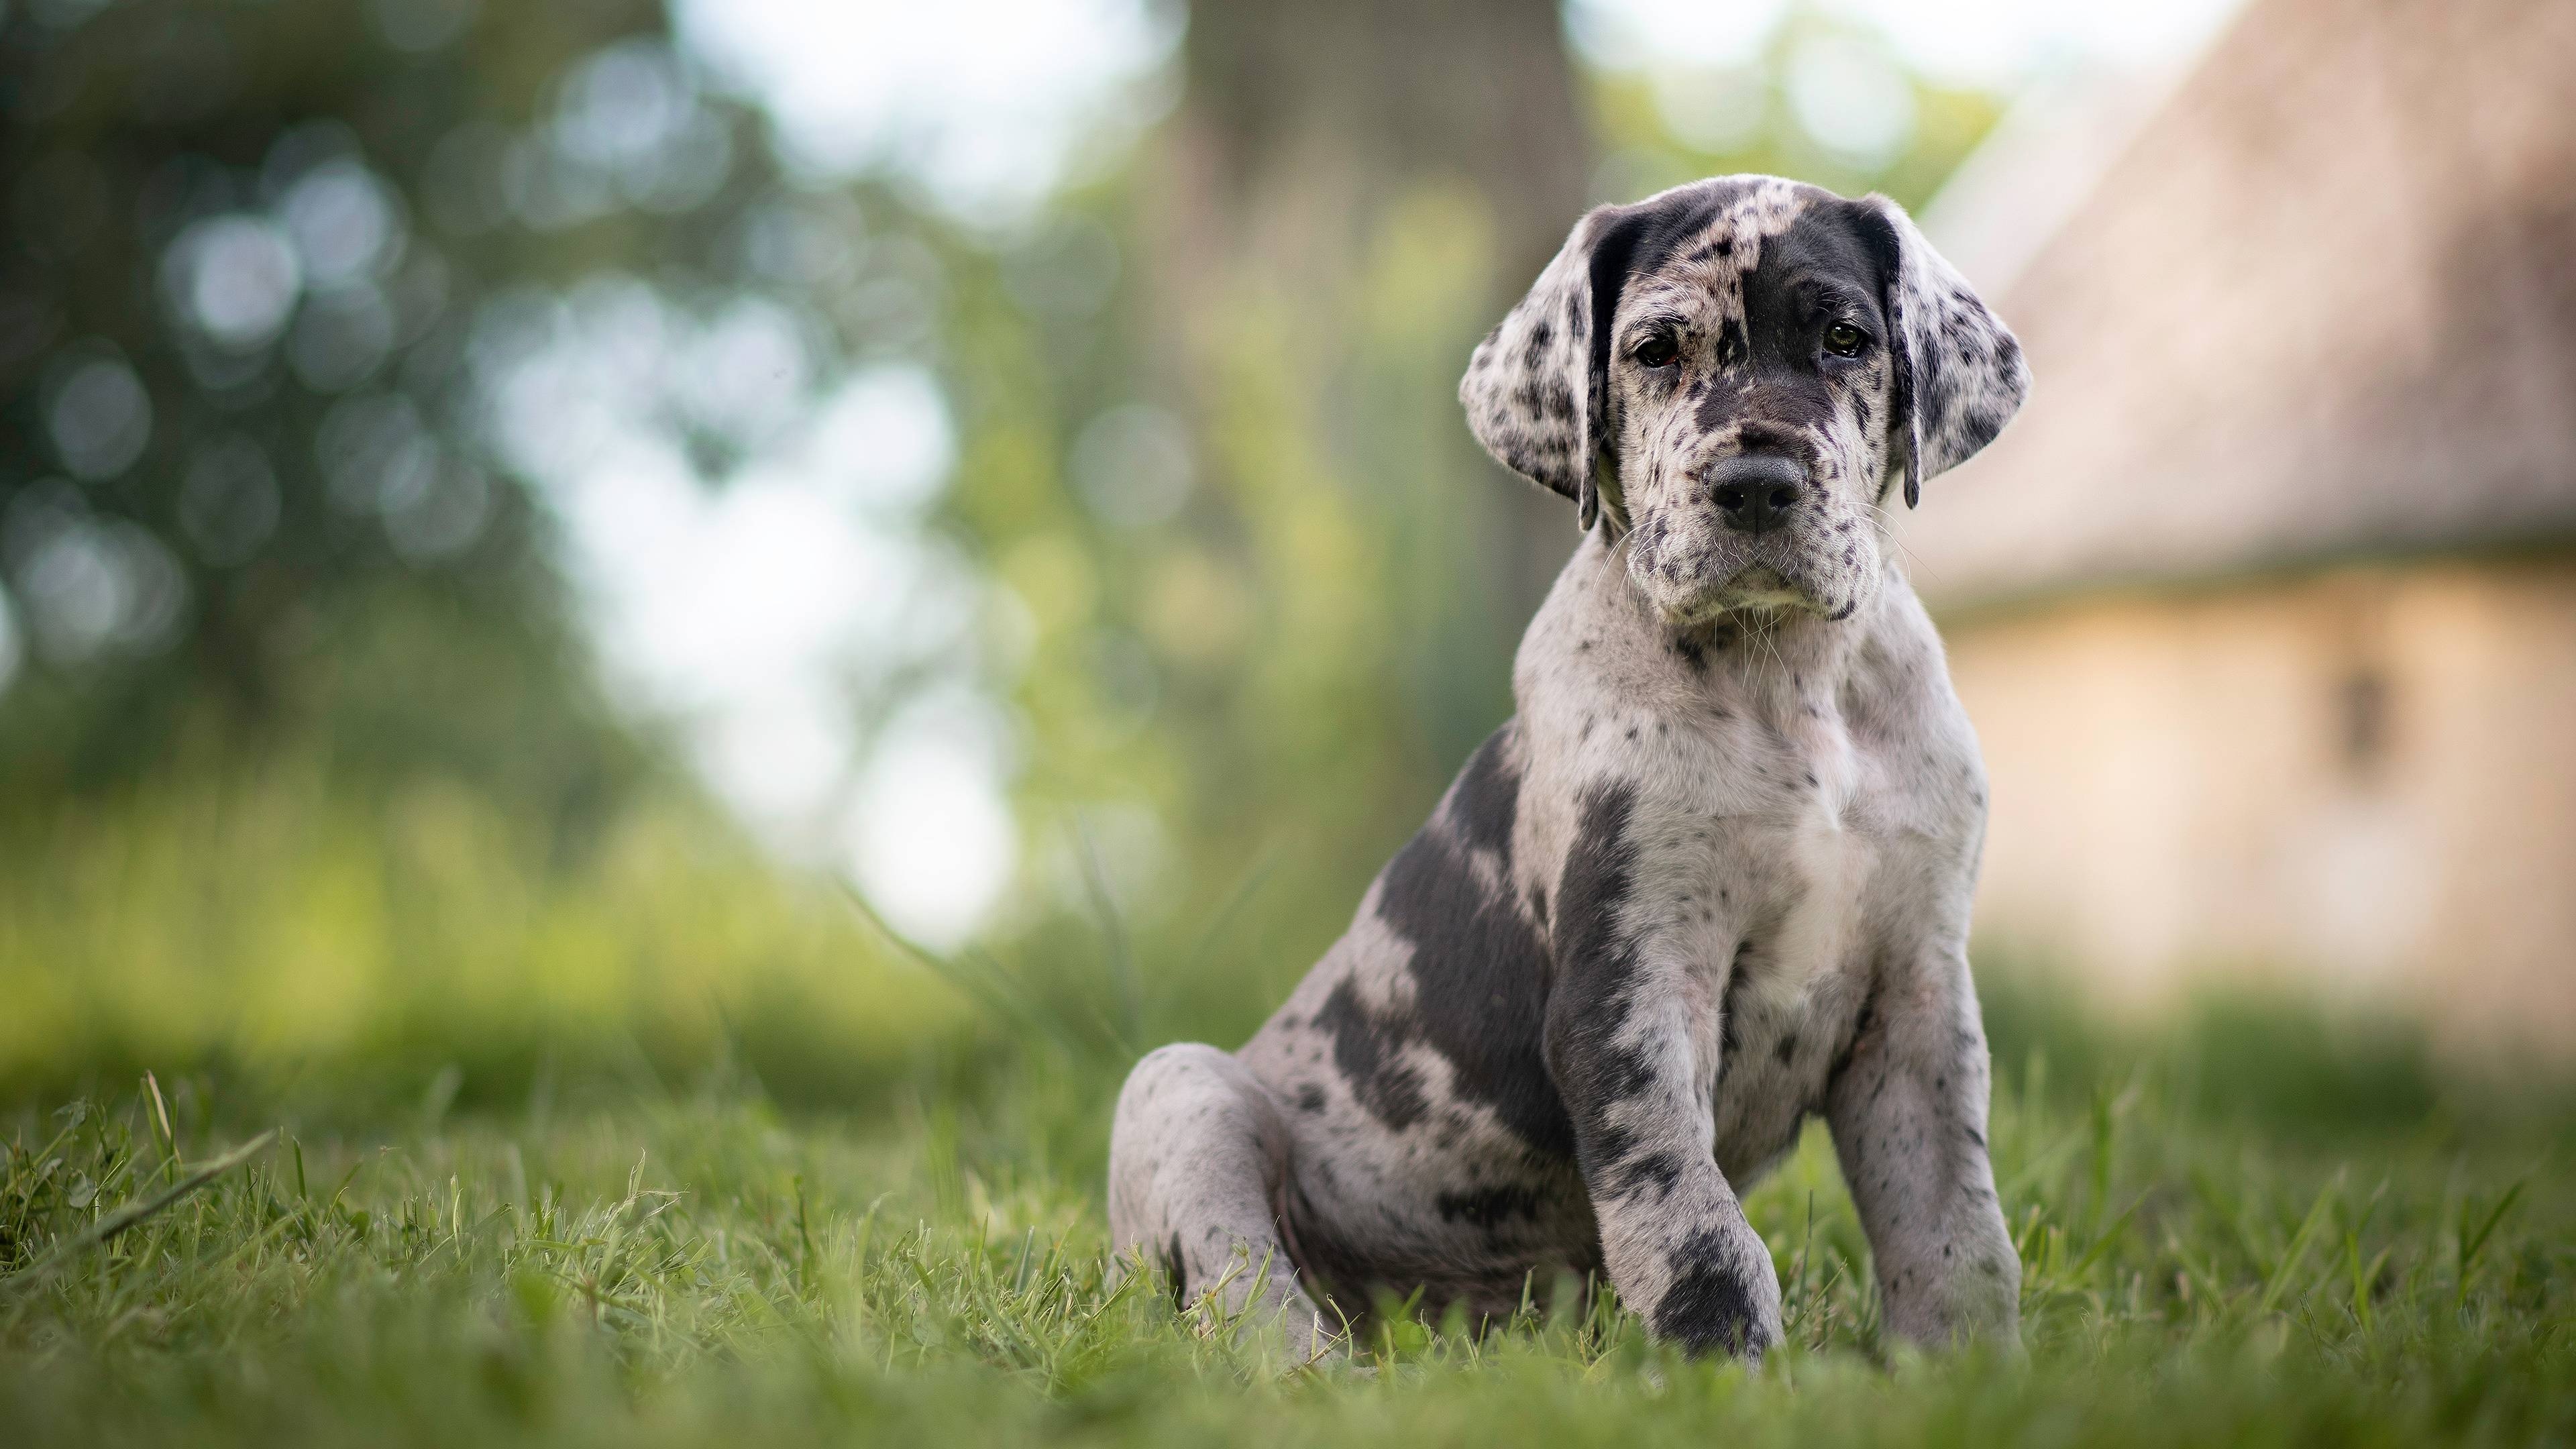 Great Dane: A large sized dog breed, German Mastiff, Descends from hunting dogs from the Middle Ages. 3840x2160 4K Wallpaper.